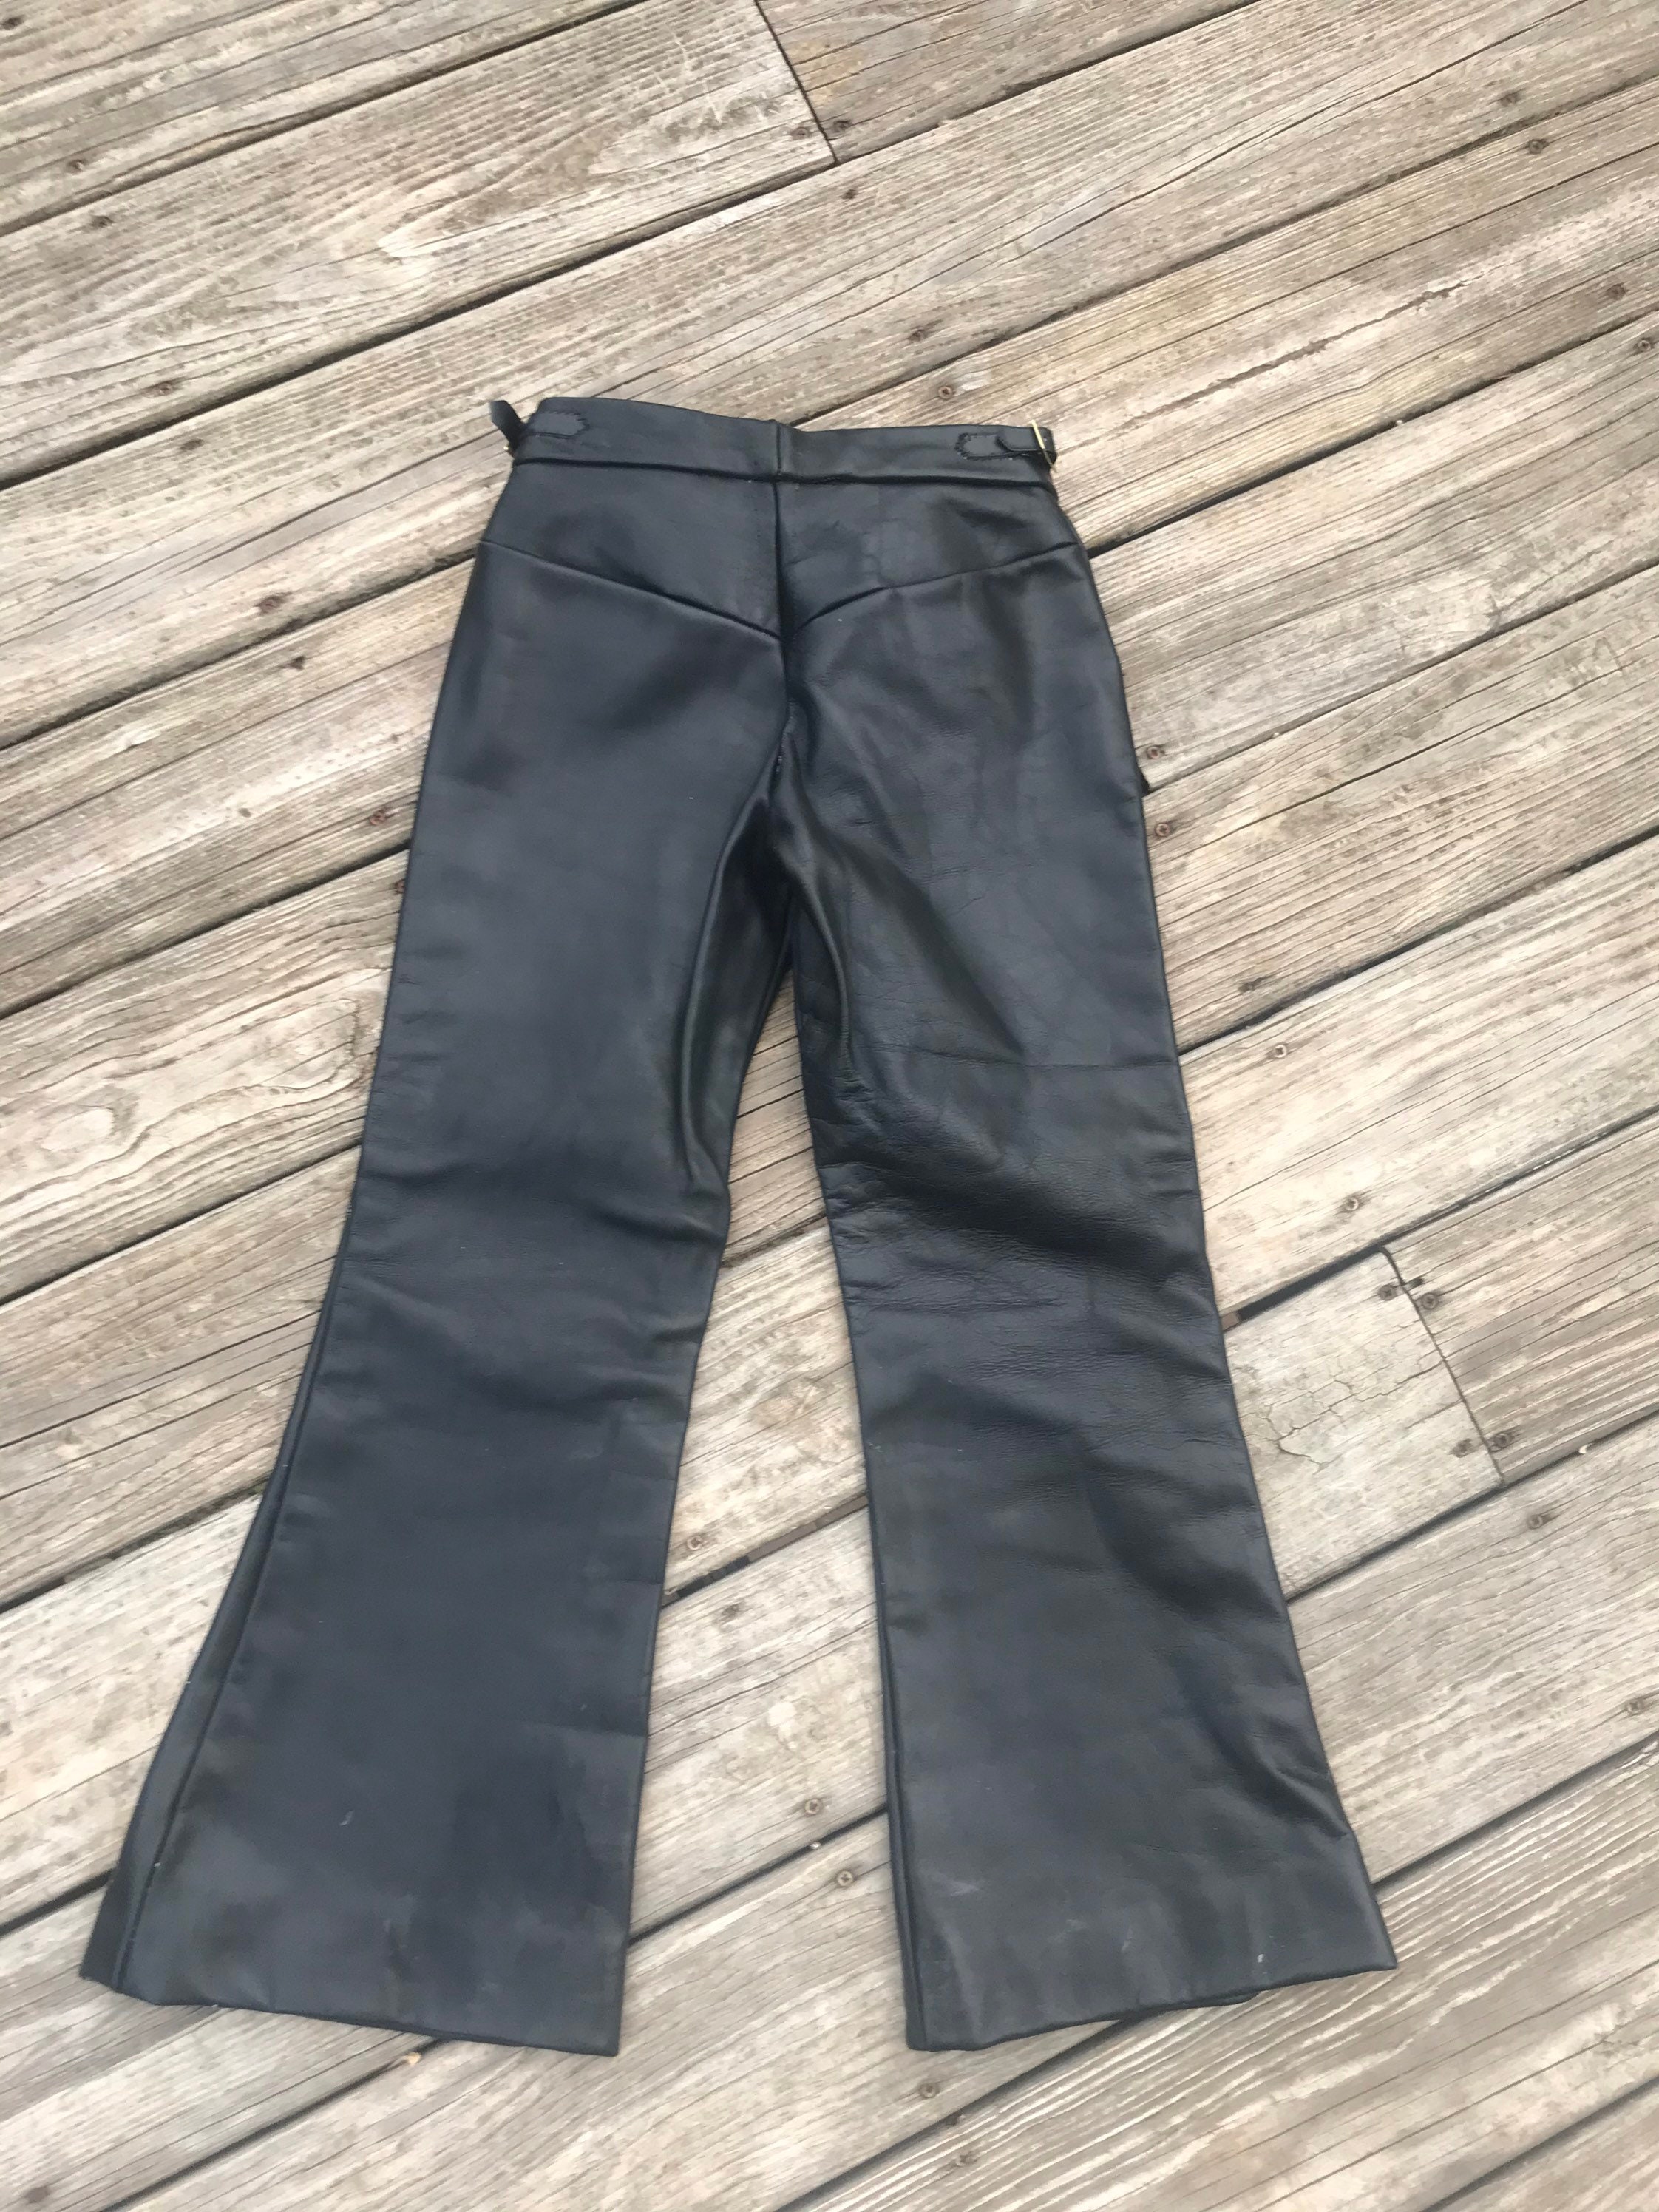 Vintage Leather flared pants. Size small | Etsy